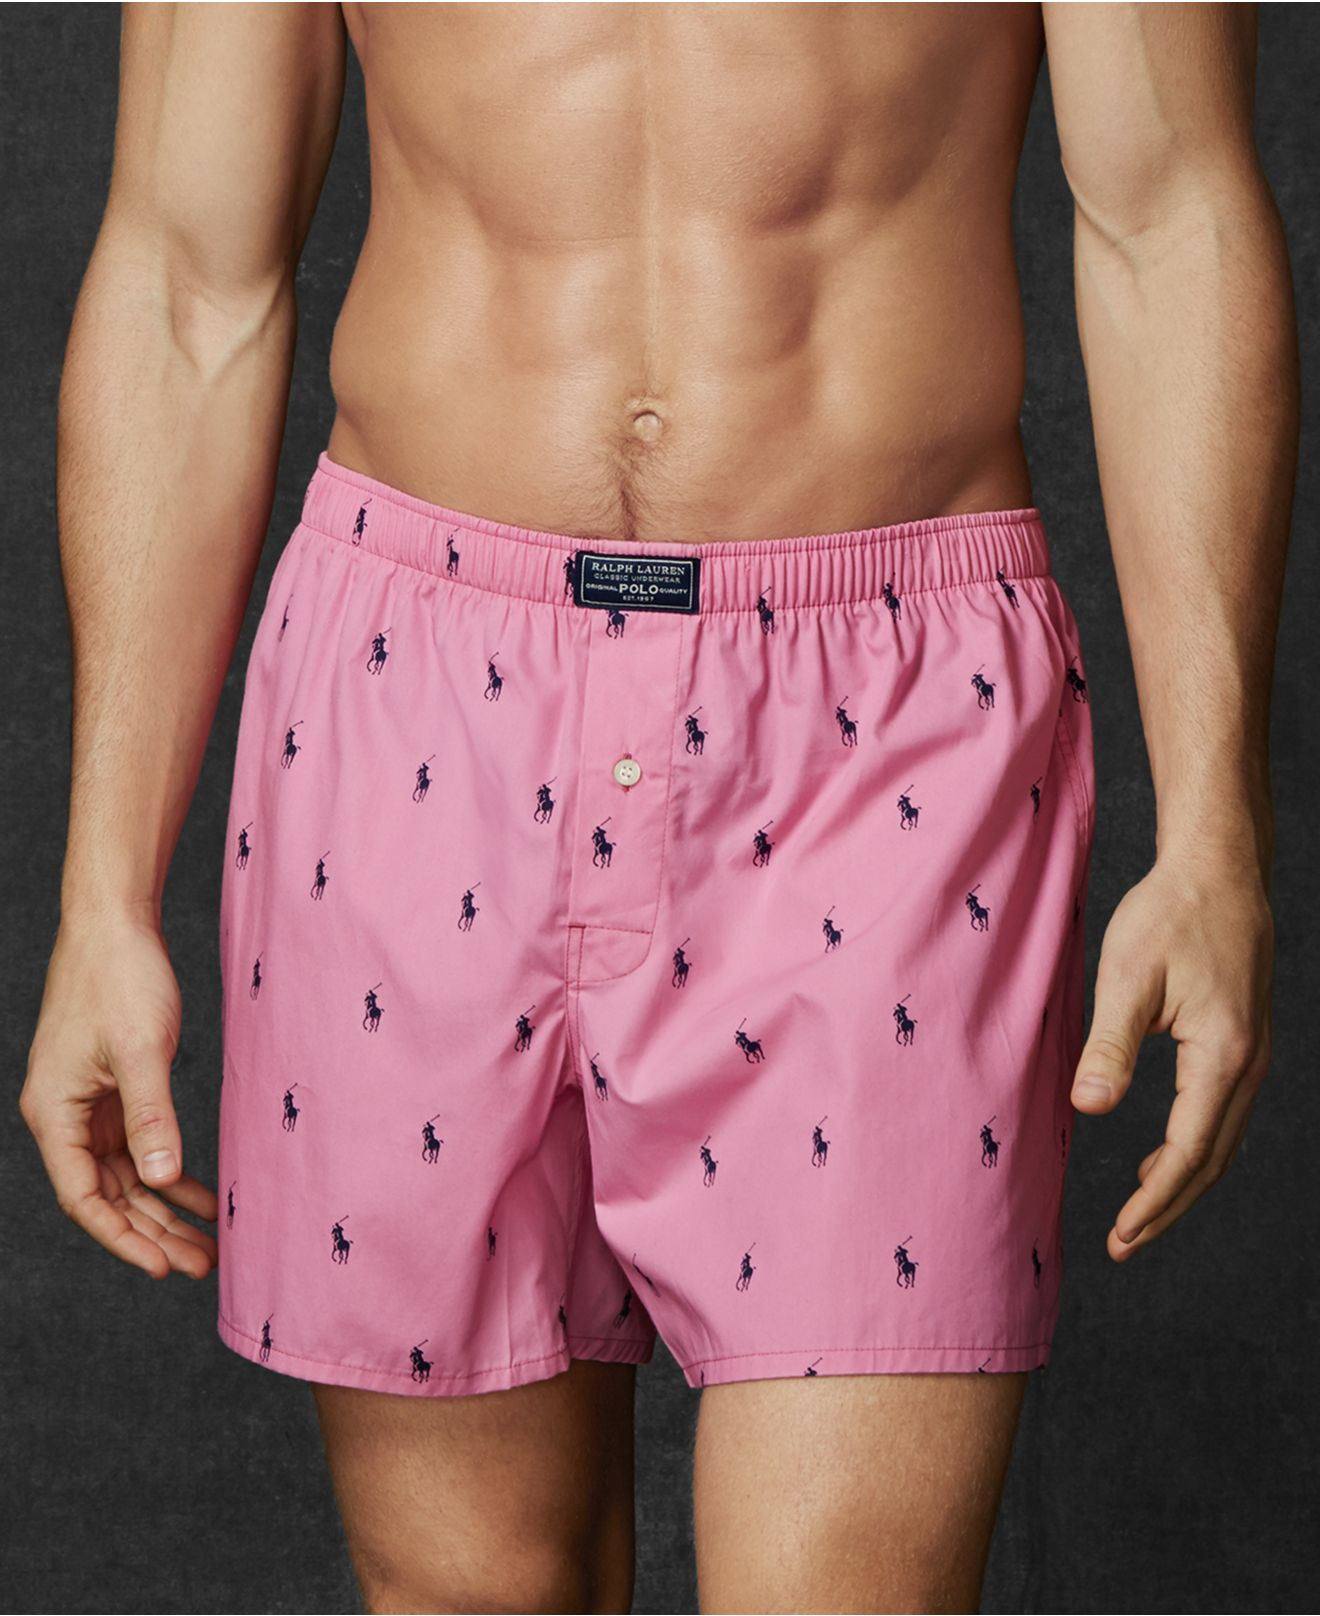 Lyst - Polo Ralph Lauren Allover Pony Player Boxers in Pink for Men